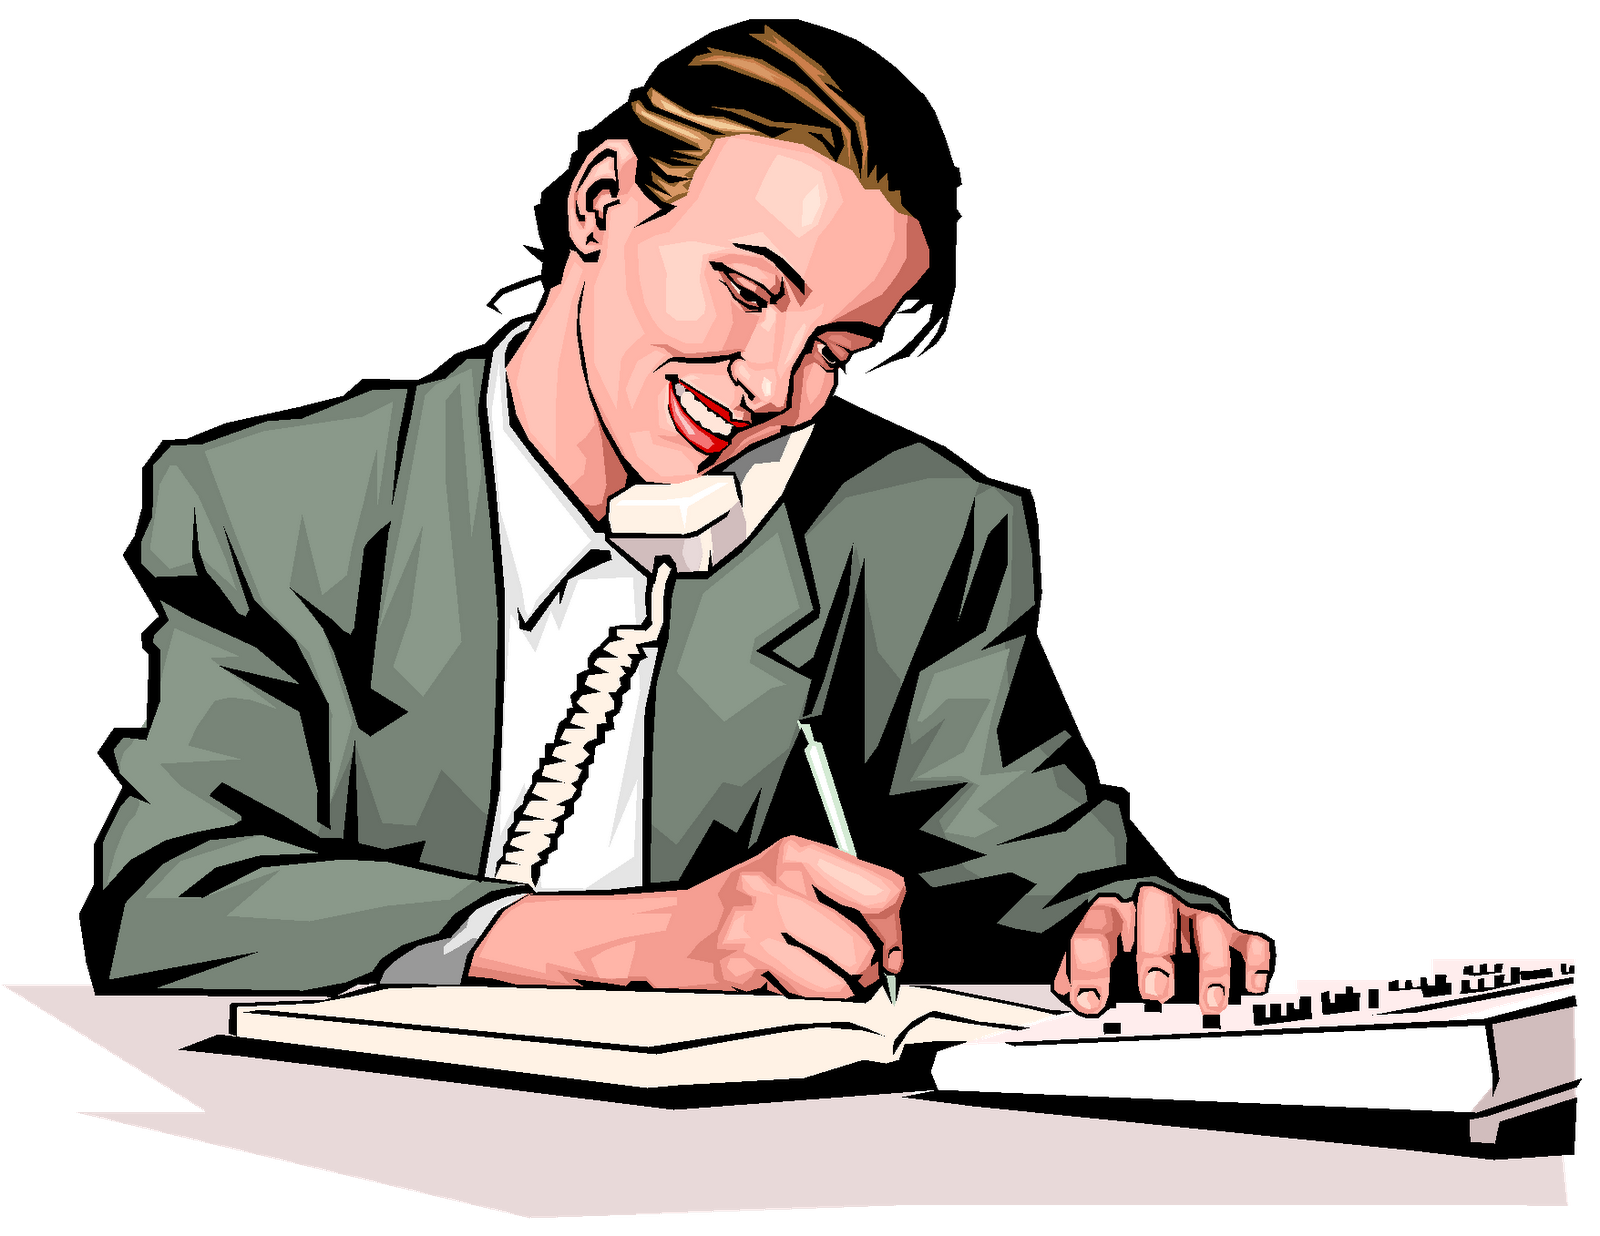 Clipart of man on telephone